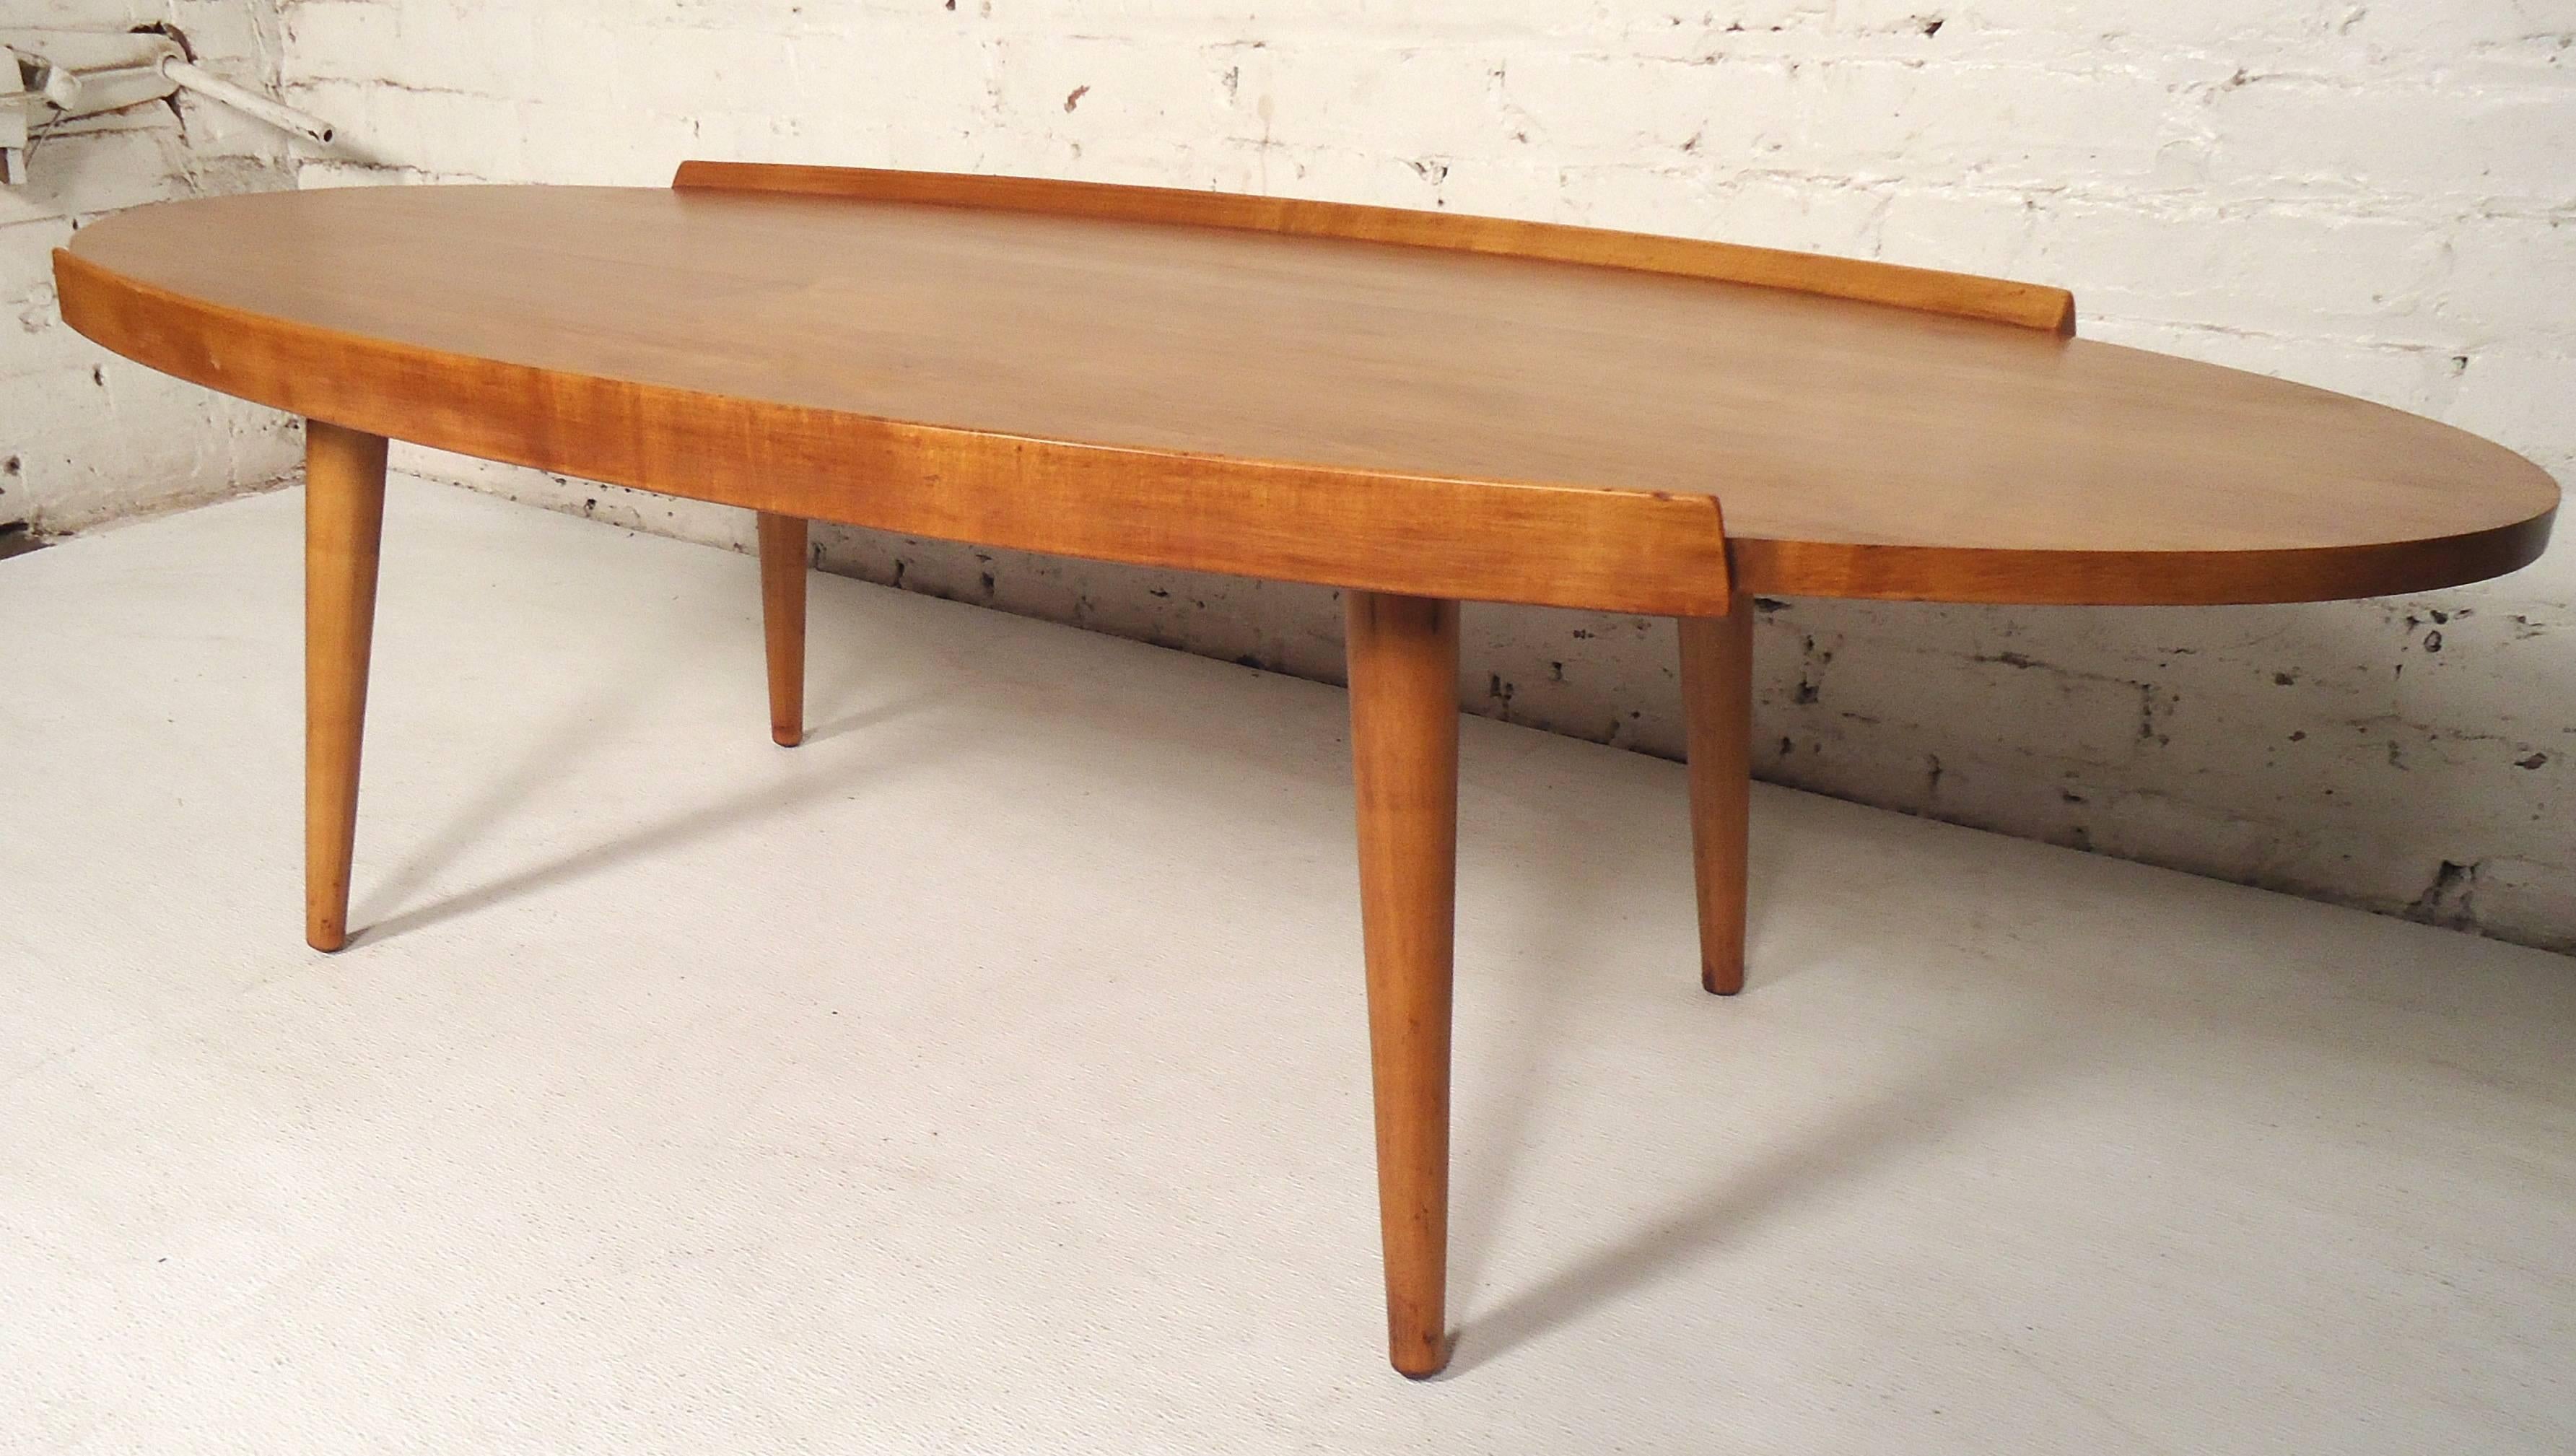 Vintage modern maple table with trim and tapered legs. Great shape, and newly refinished.

(Please confirm item location - NY or NJ - with dealer).
 